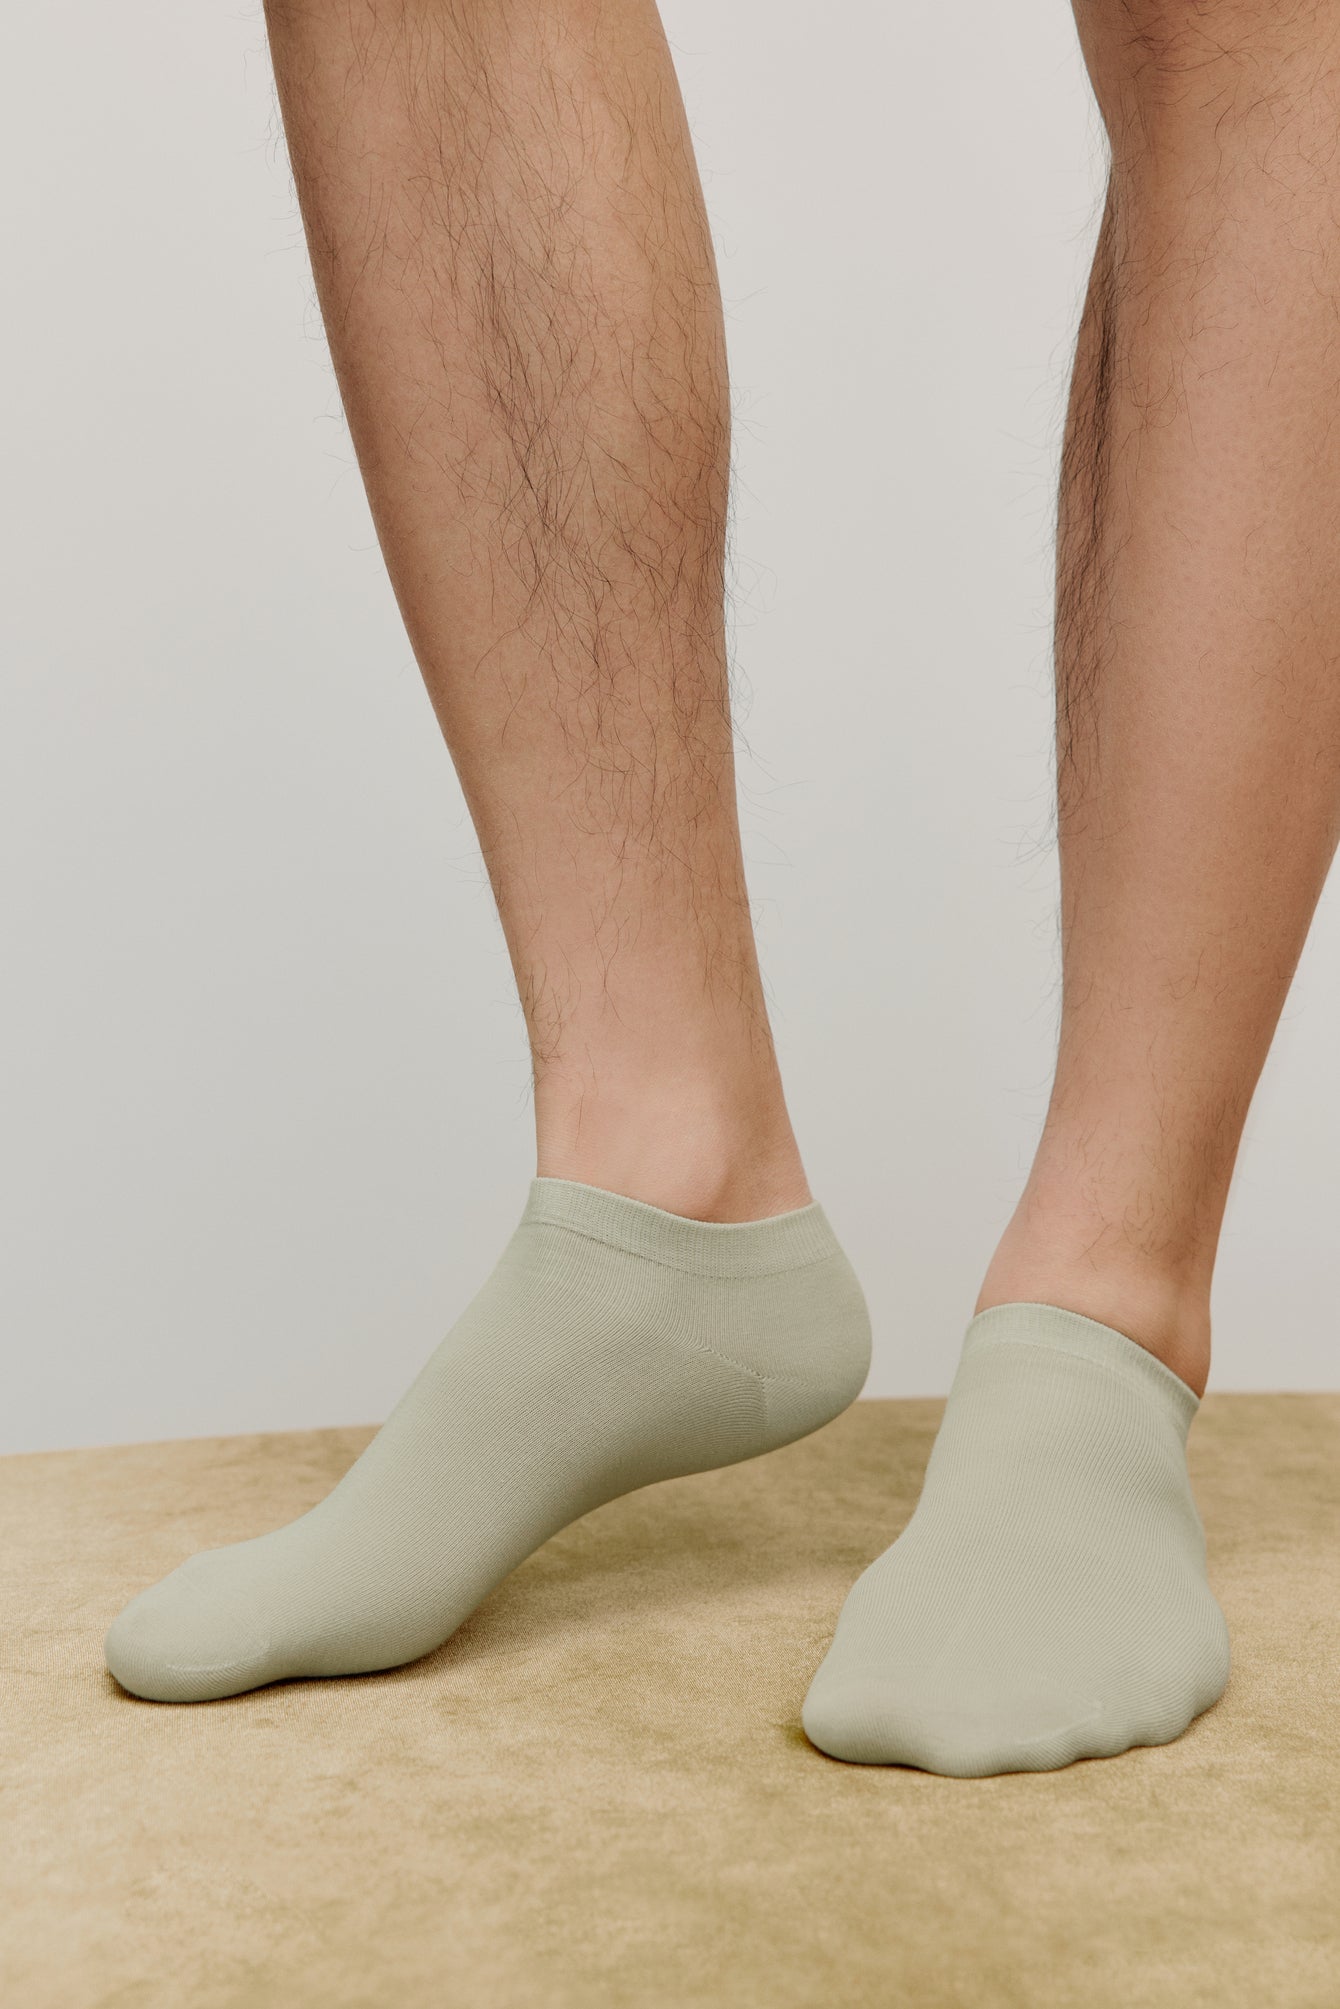 a person wearing green ankle socks